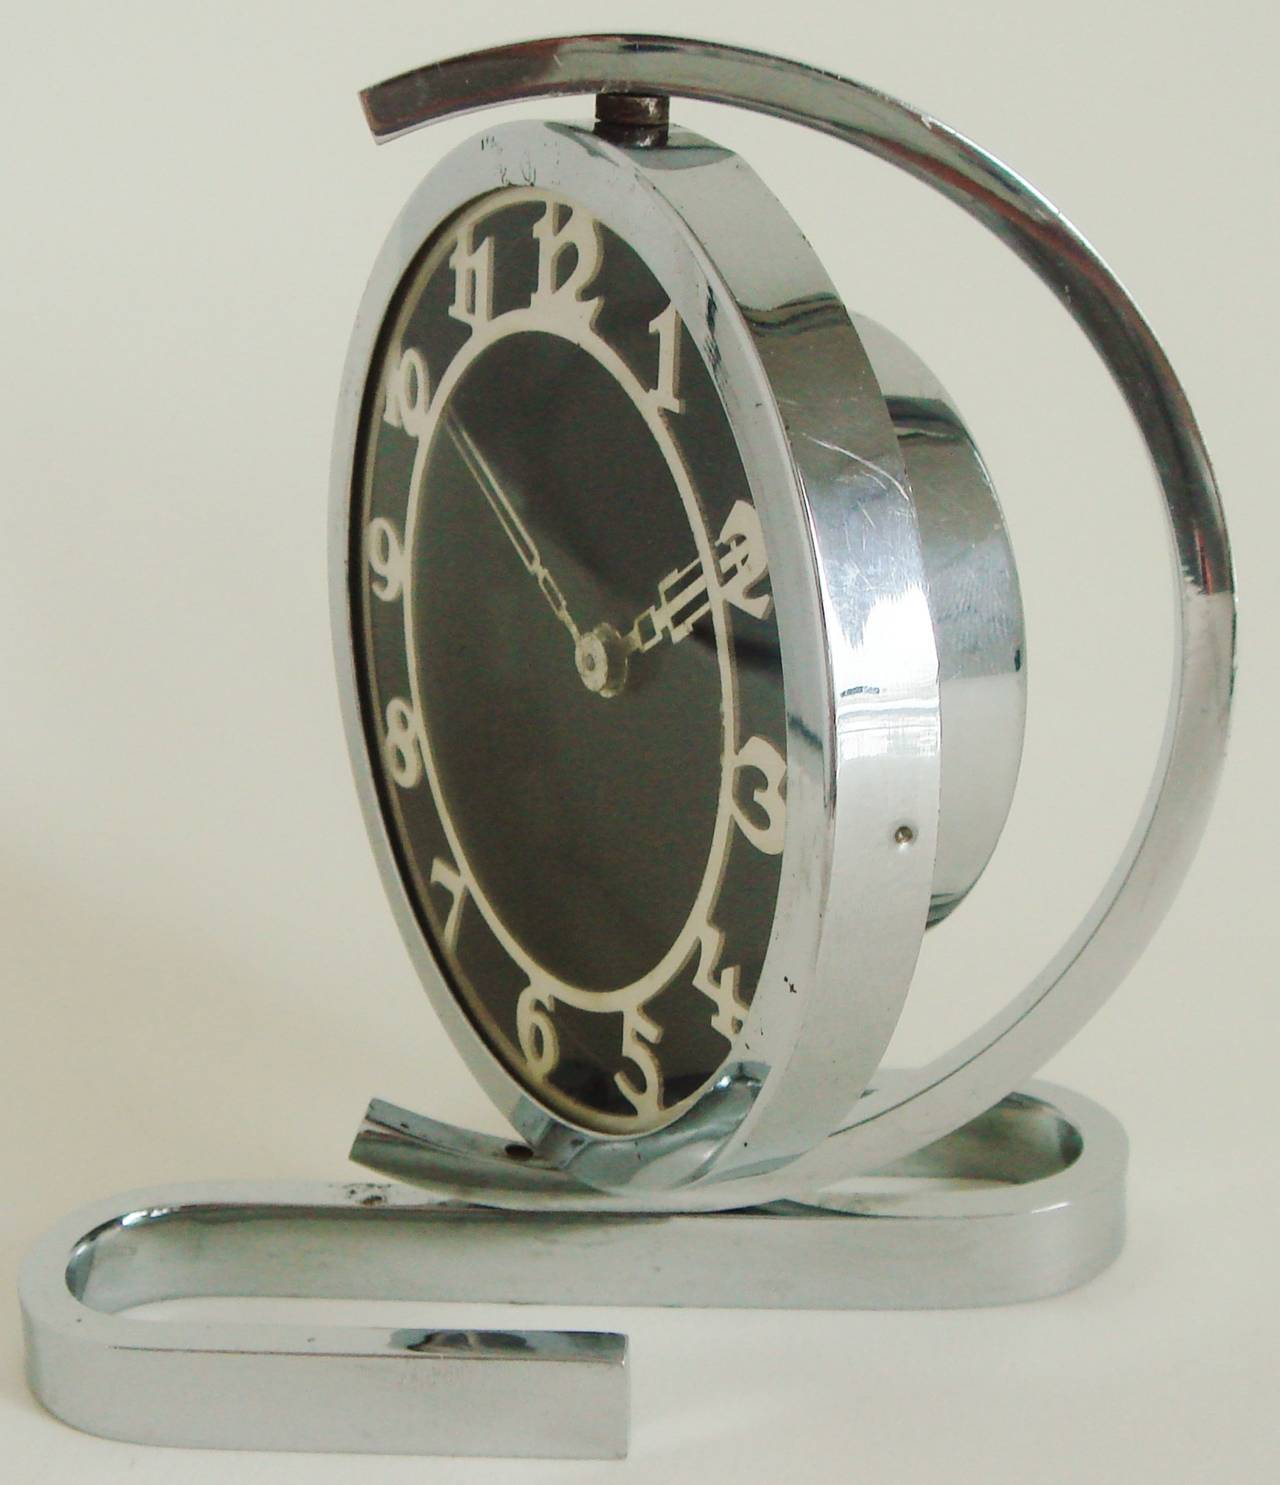 This beautifully designed and stylish American Art Deco mechanical swivel desk clock comes from the New Haven Clock Company and bears a diamond shaped etched brand logo 